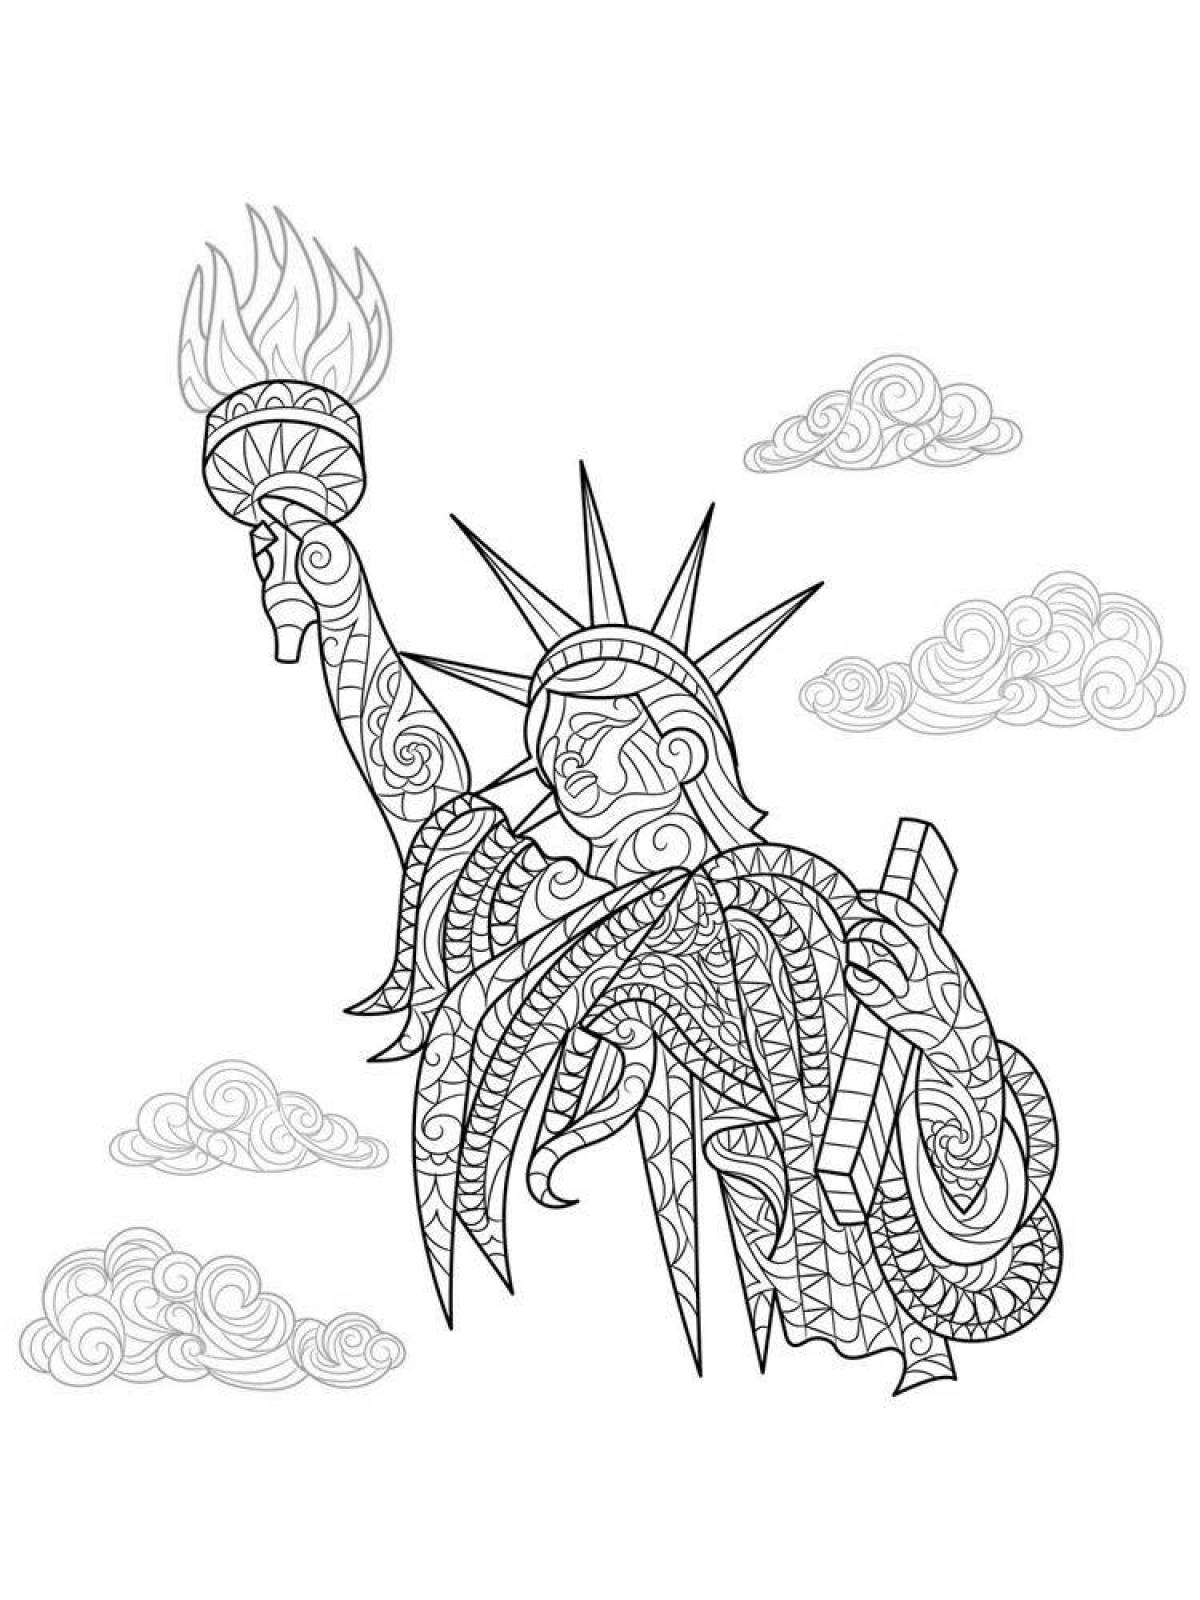 Coloring book of the monumental Statue of Liberty